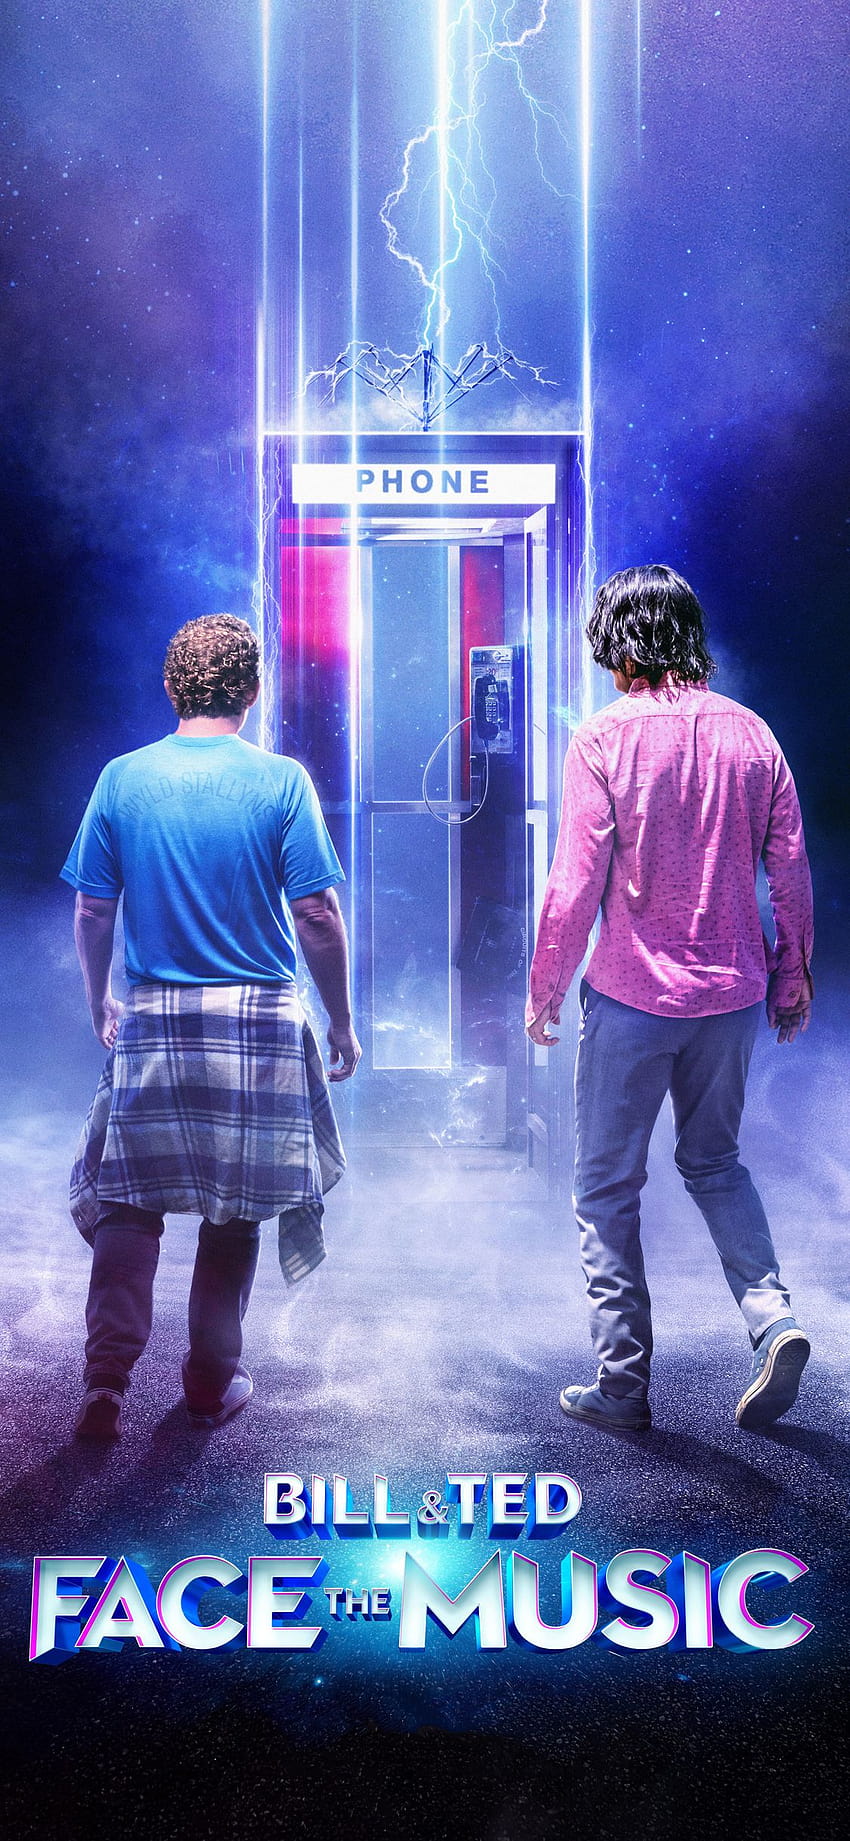 1125x2436 Bill y Ted Face The Music 2020 Movie Iphone XS, Iphone 10, Iphone X, s y bill ted face the music fondo de pantalla del teléfono